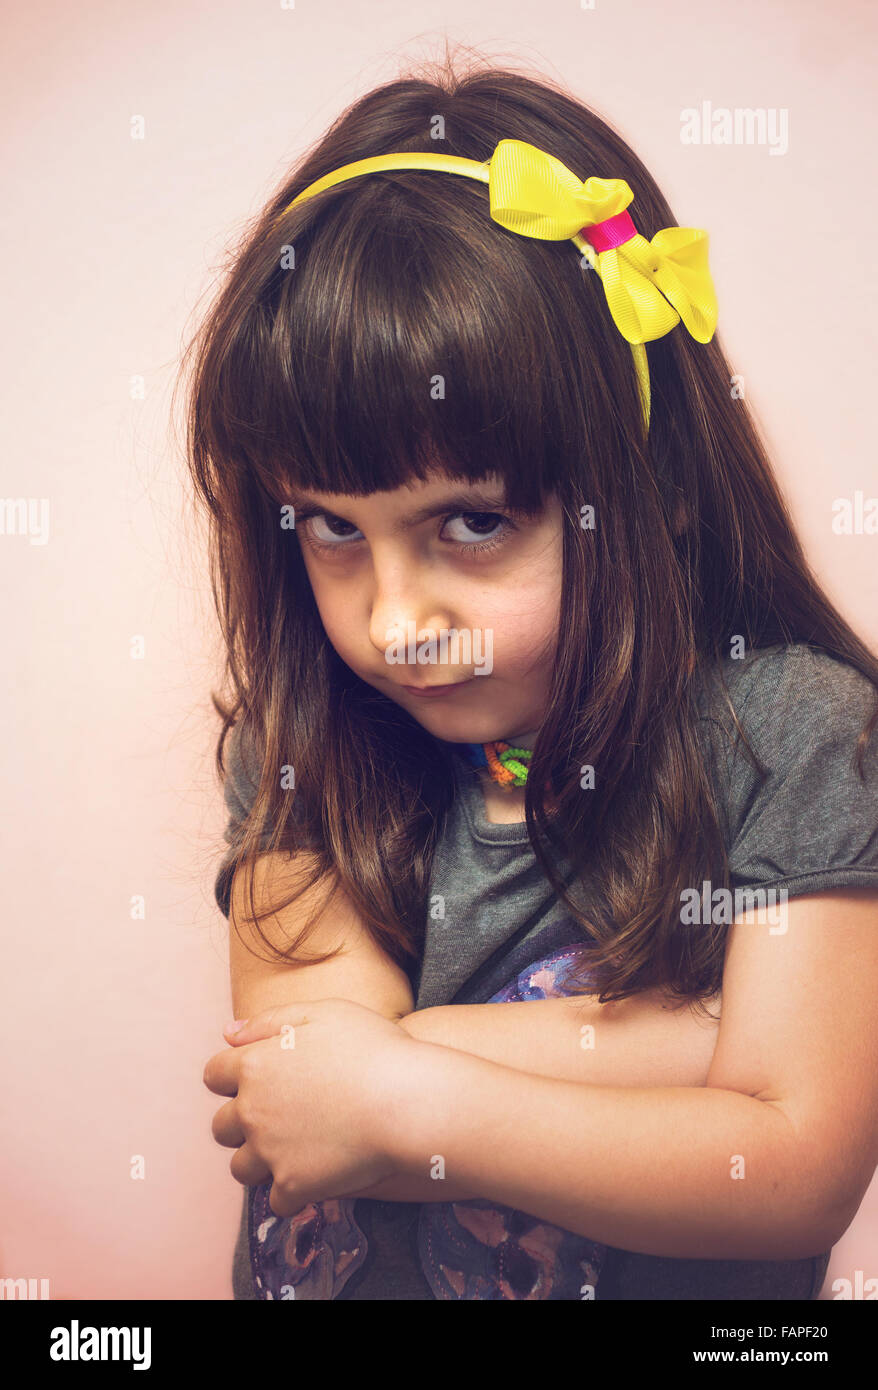 Angry child girl portrait at home in soft tones Stock Photo